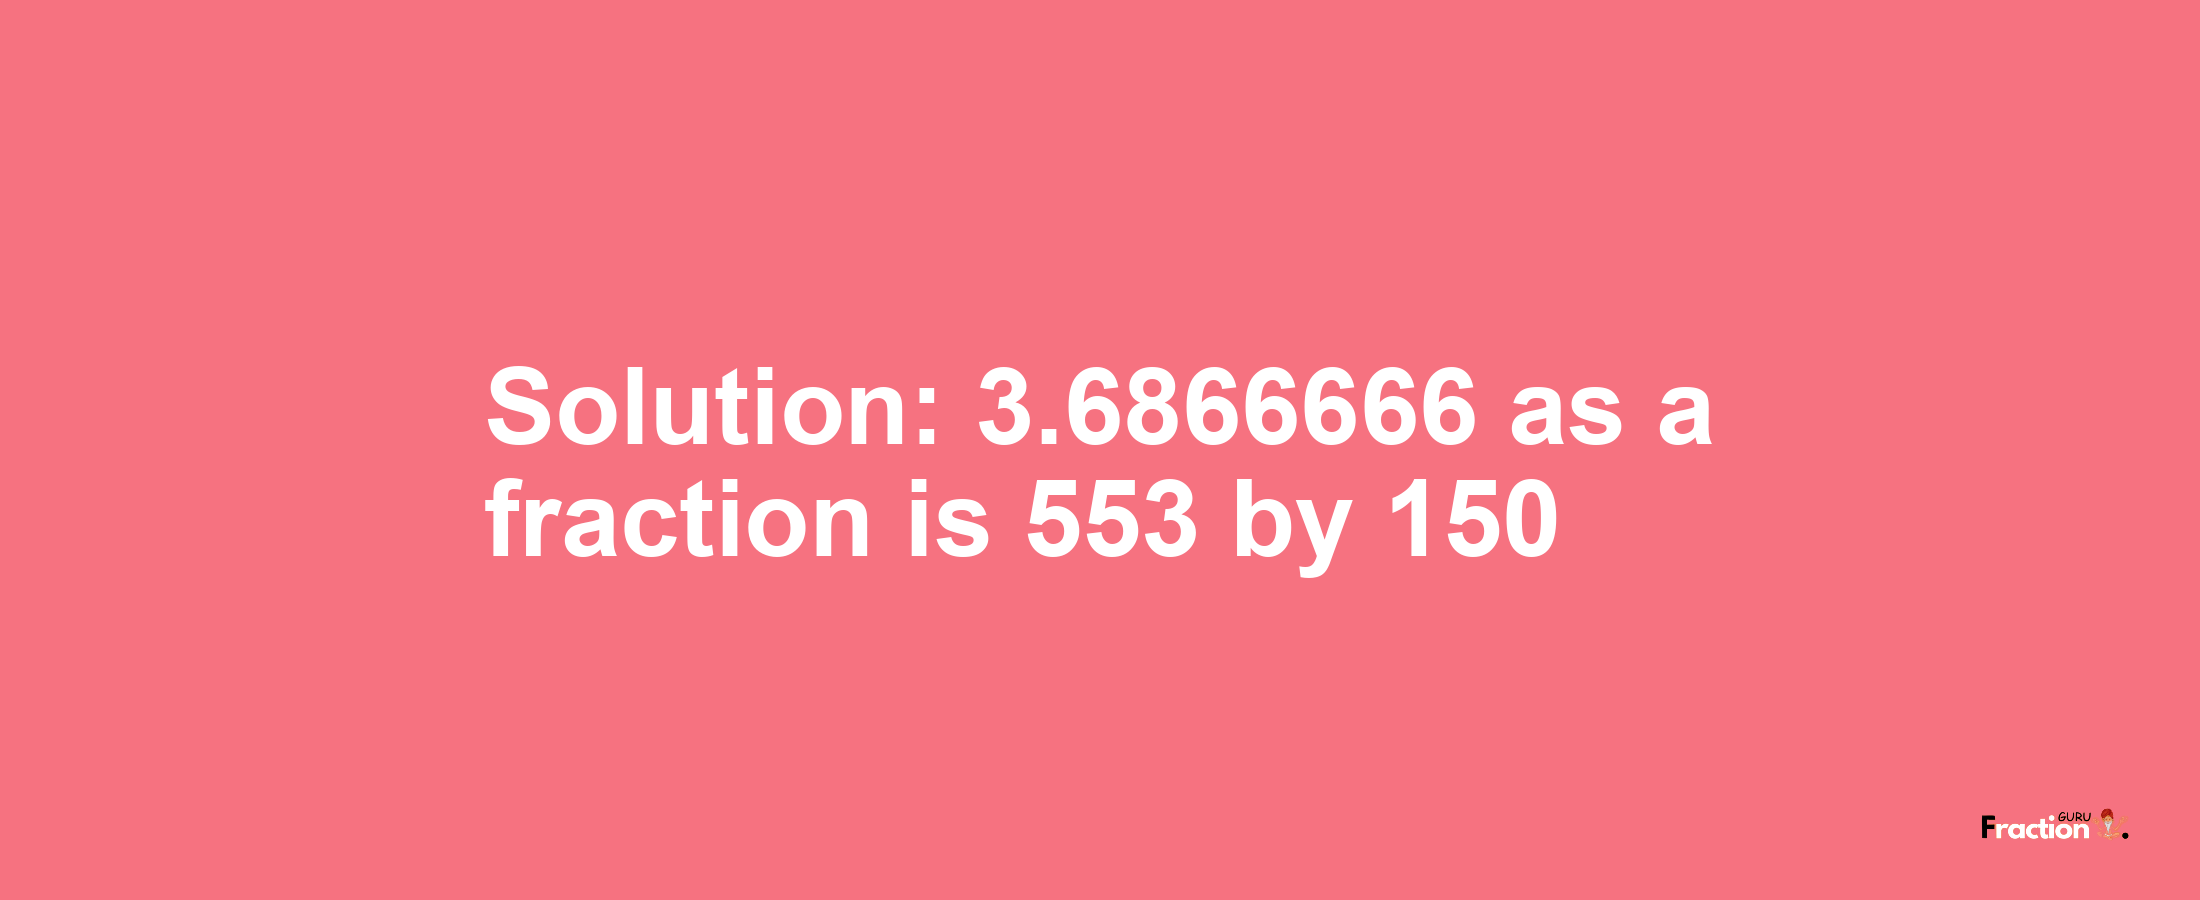 Solution:3.6866666 as a fraction is 553/150